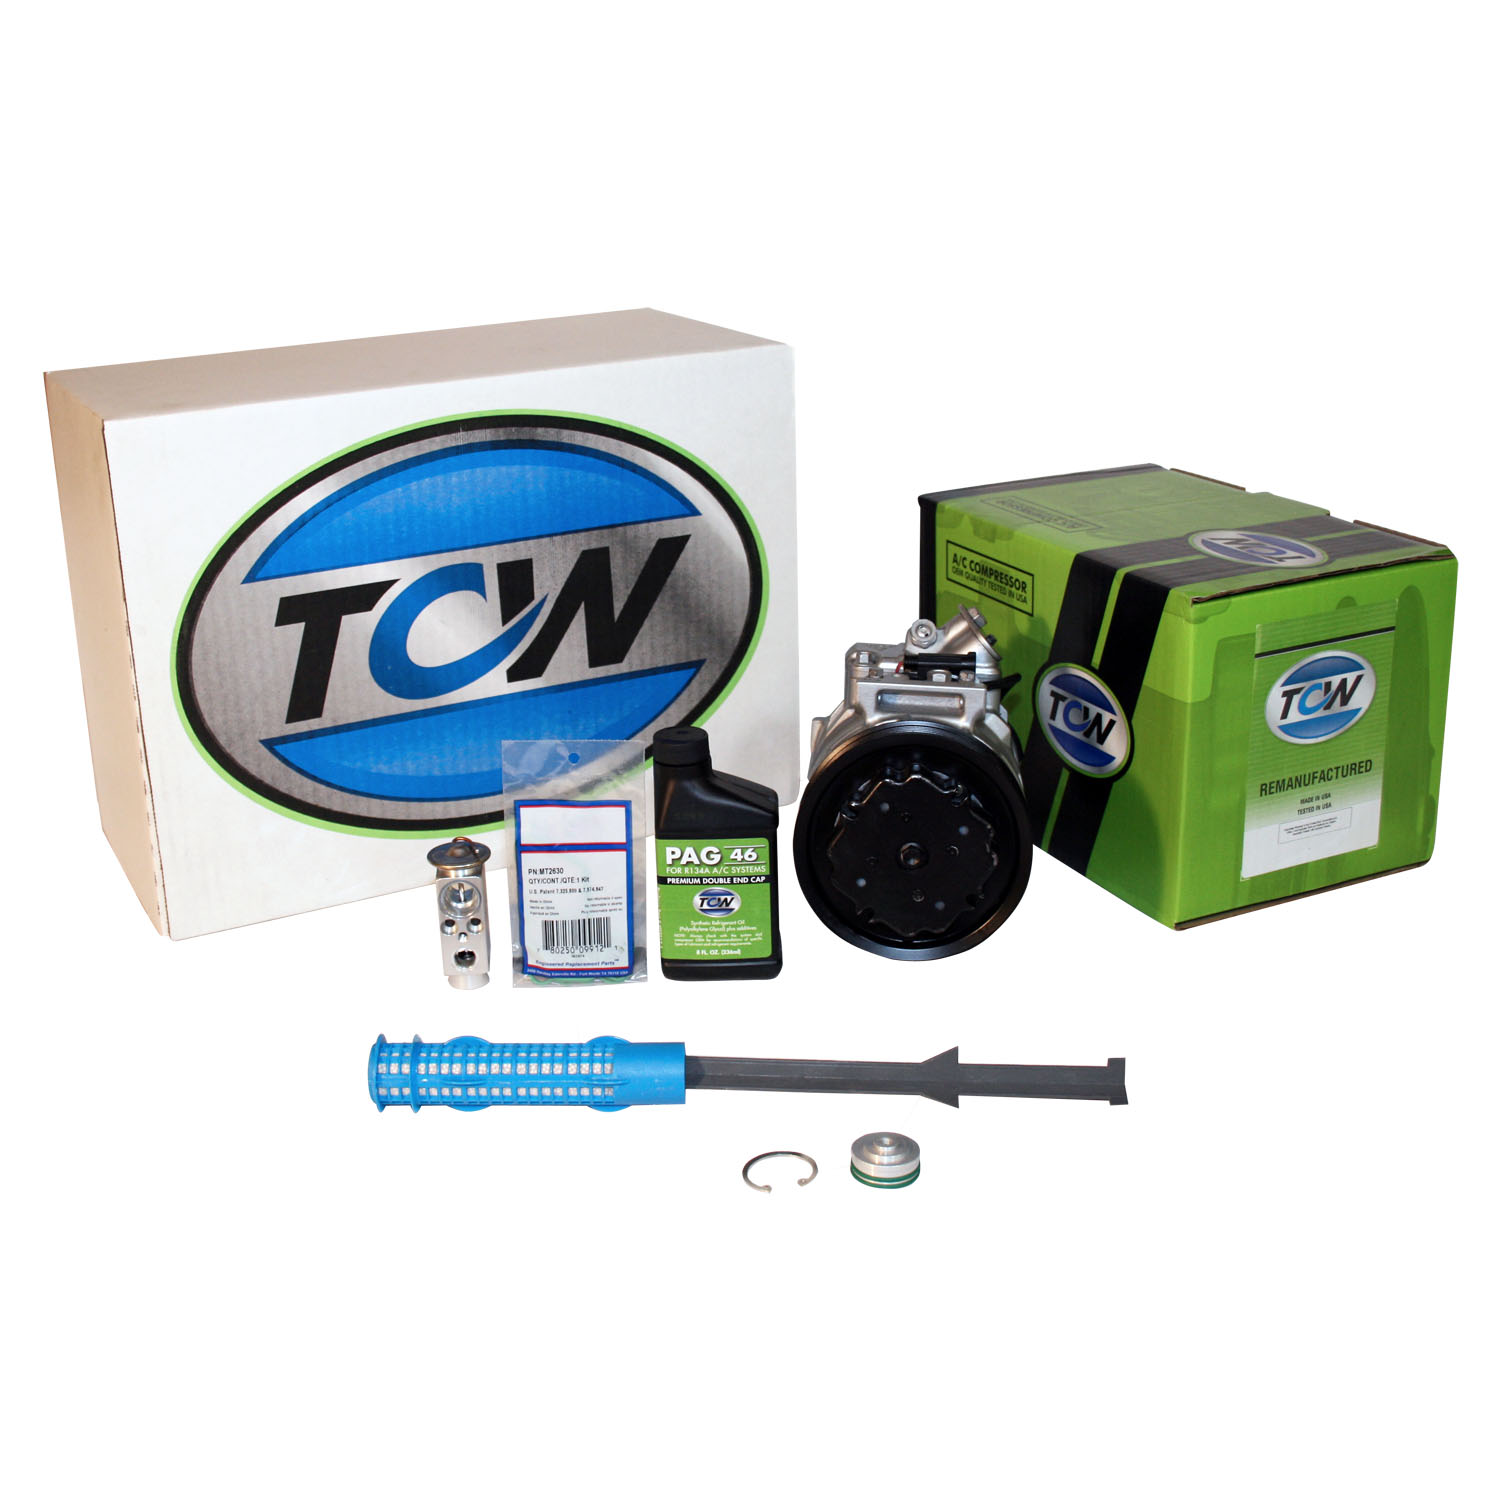 TCW Vehicle A/C Kit K1000435R Remanufactured Product Image field_60b6a13a6e67c